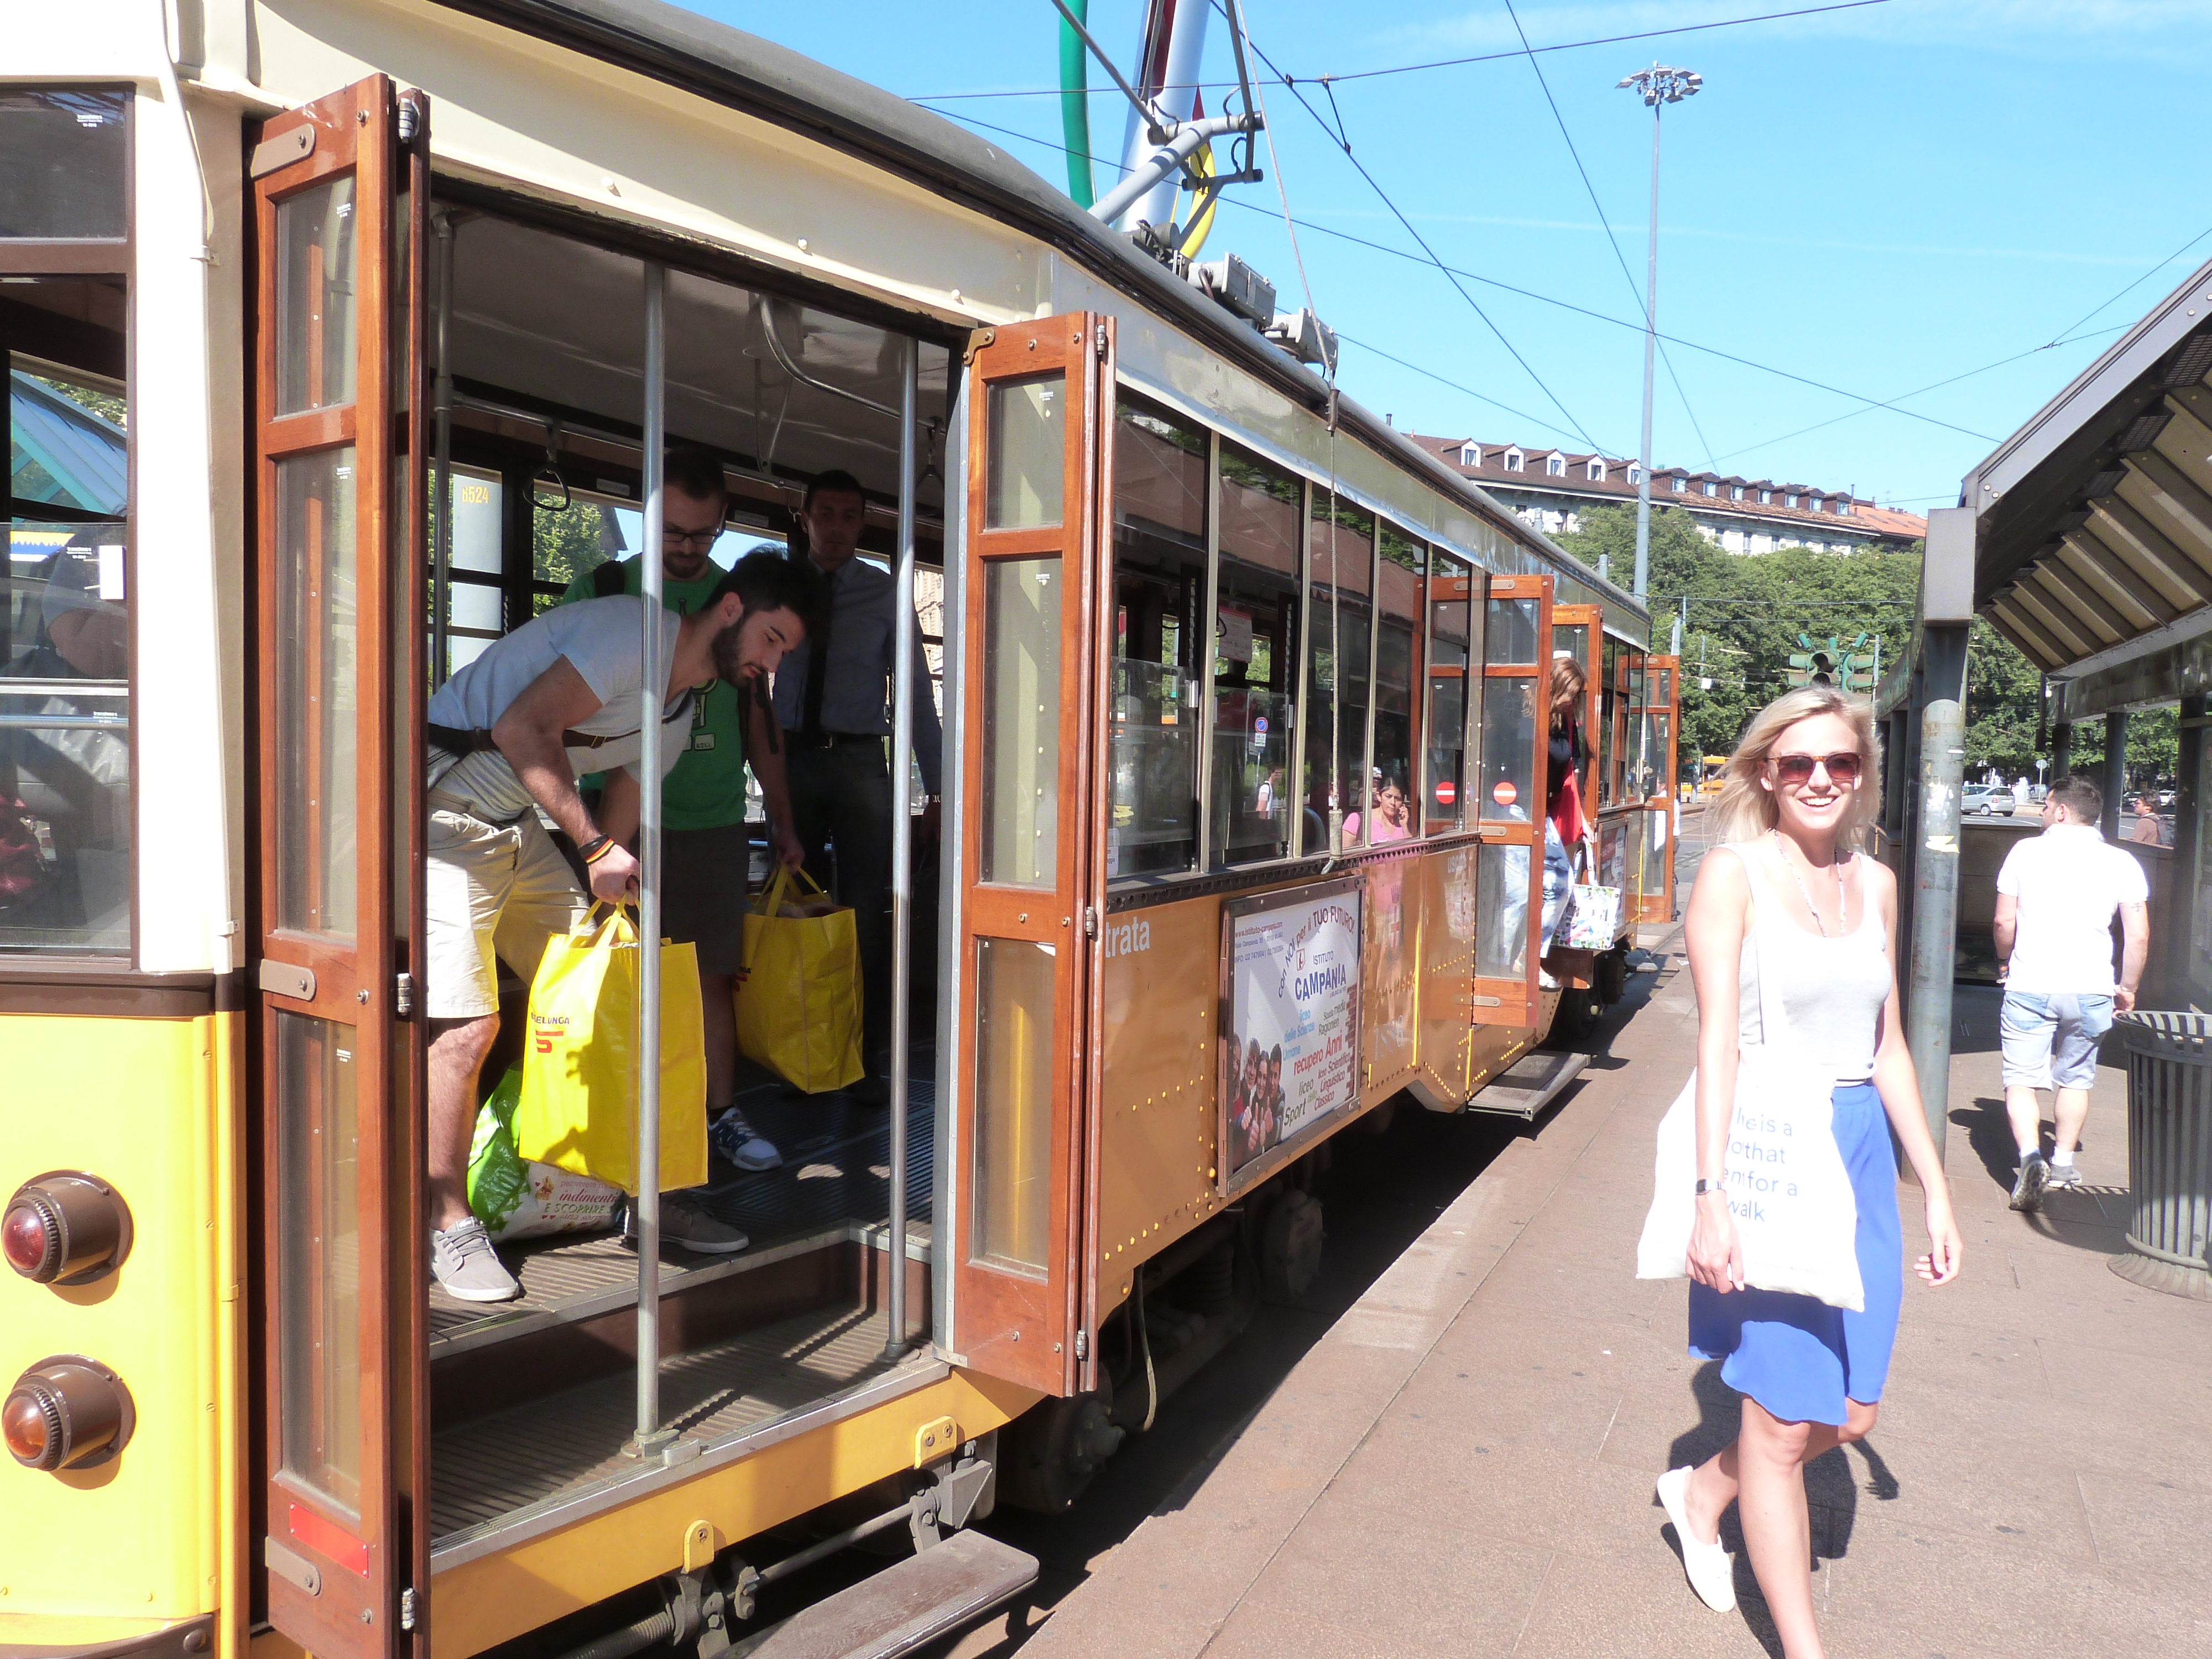 A tram we tried to pose against, but then opened its doors